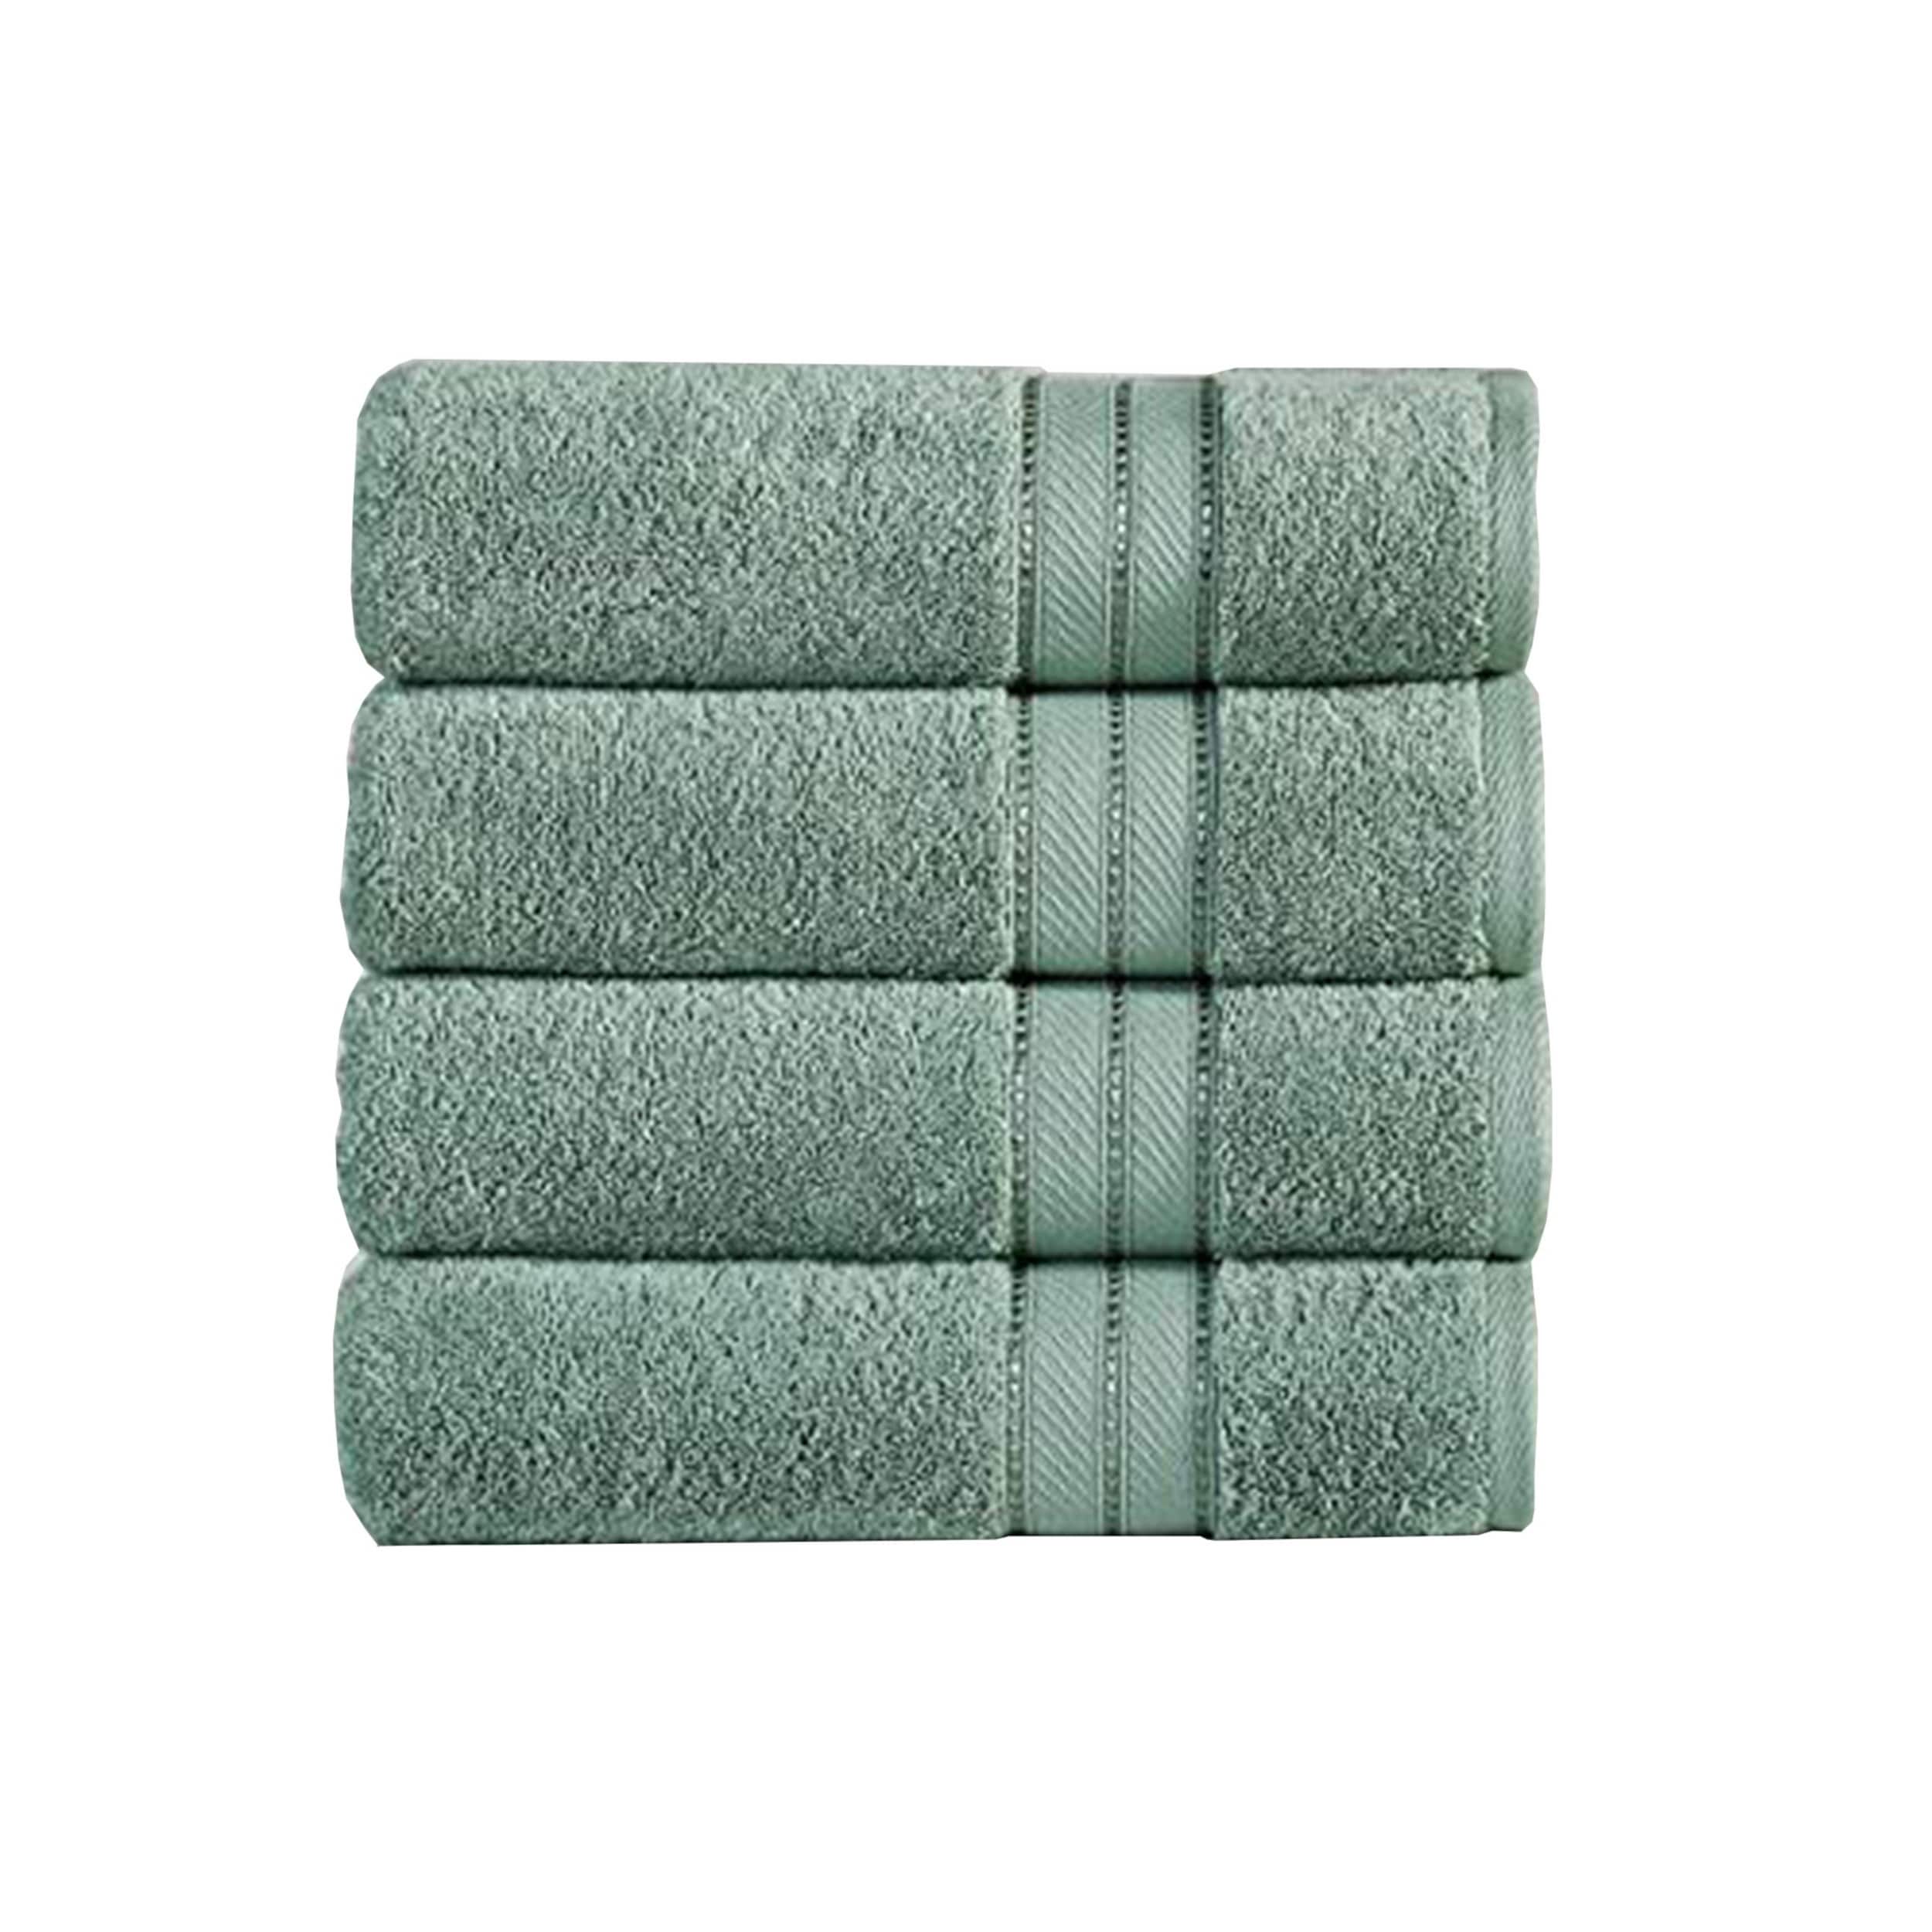 https://ak1.ostkcdn.com/images/products/is/images/direct/8d54d75c3bb117c99582a8f659de20306de7a5fa/Bergamo-4-Piece-Spun-loft-Fabric-Towels-with-Stripe-Pattern-The-Urban-Port%2CDark-Gray.jpg